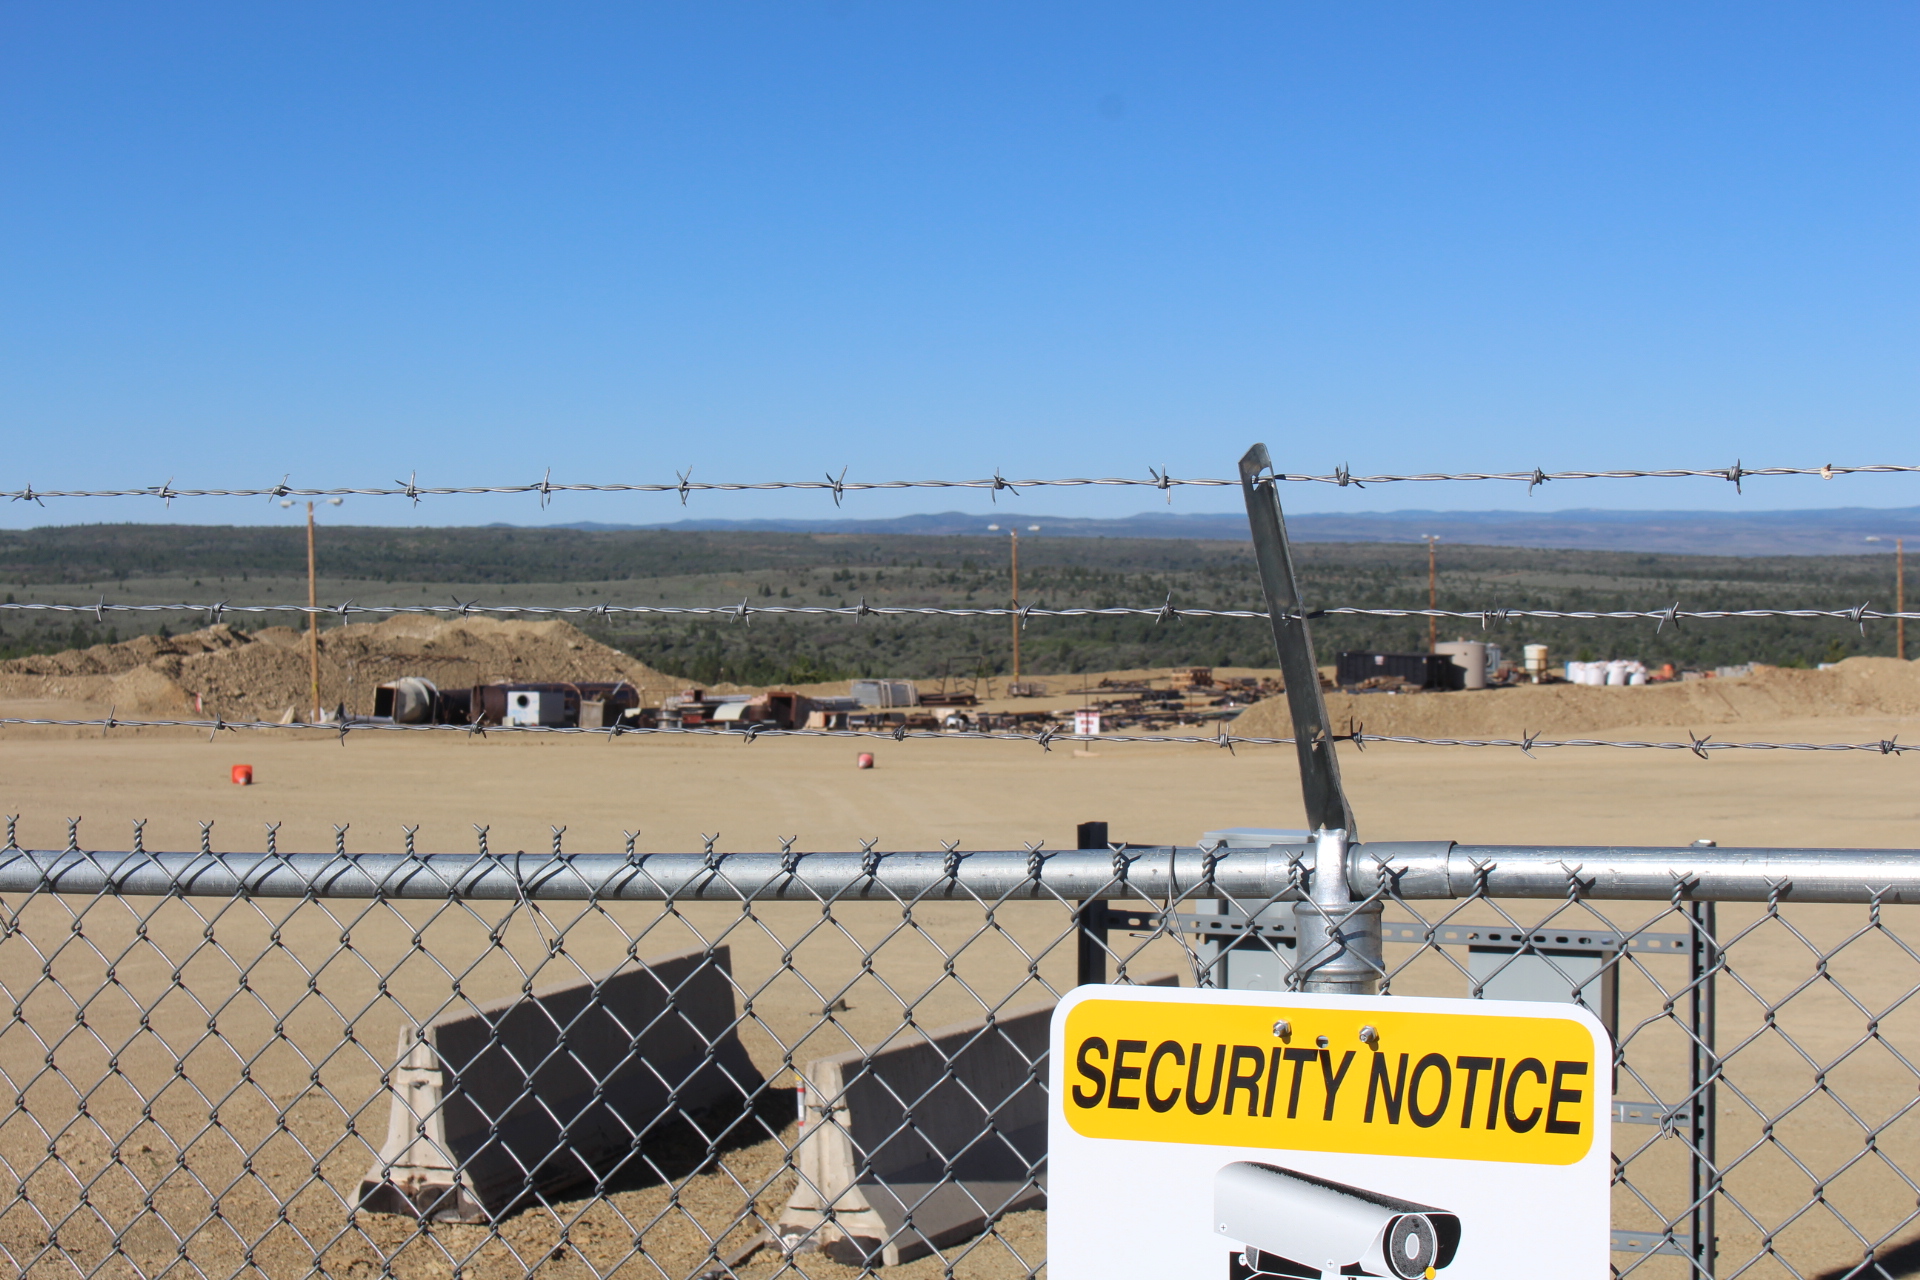 security fence with barb wire at us oil sands pr springs mine site